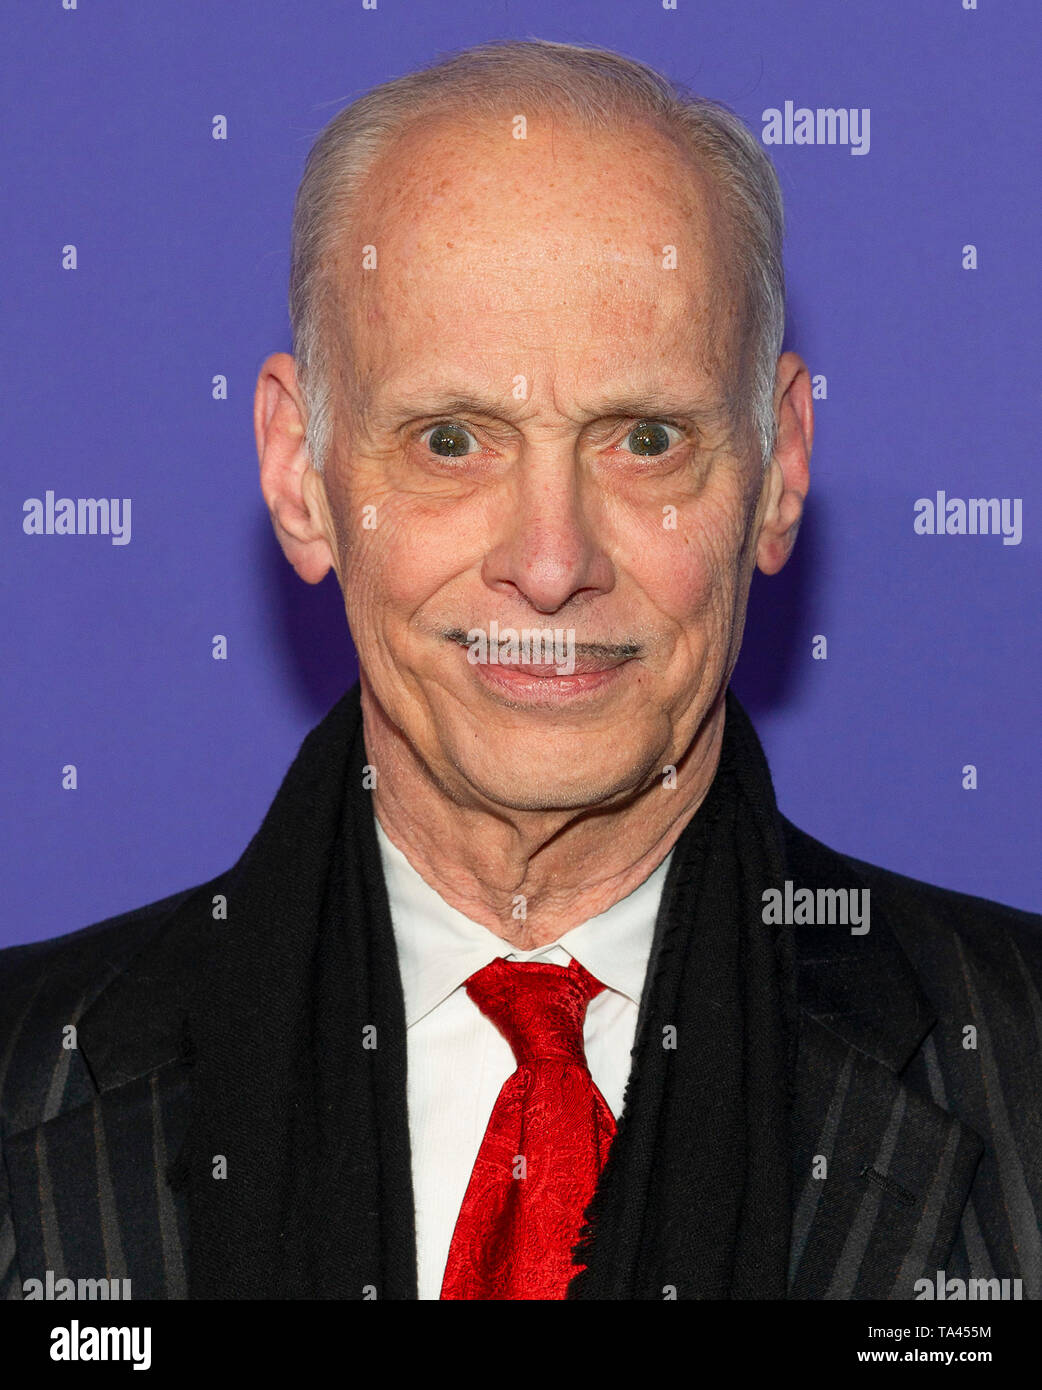 New York, NY - April 29, 2019: John Waters attends the Film Society Of Lincoln Center's 50th Anniversary Gala at Lincoln Center Stock Photo